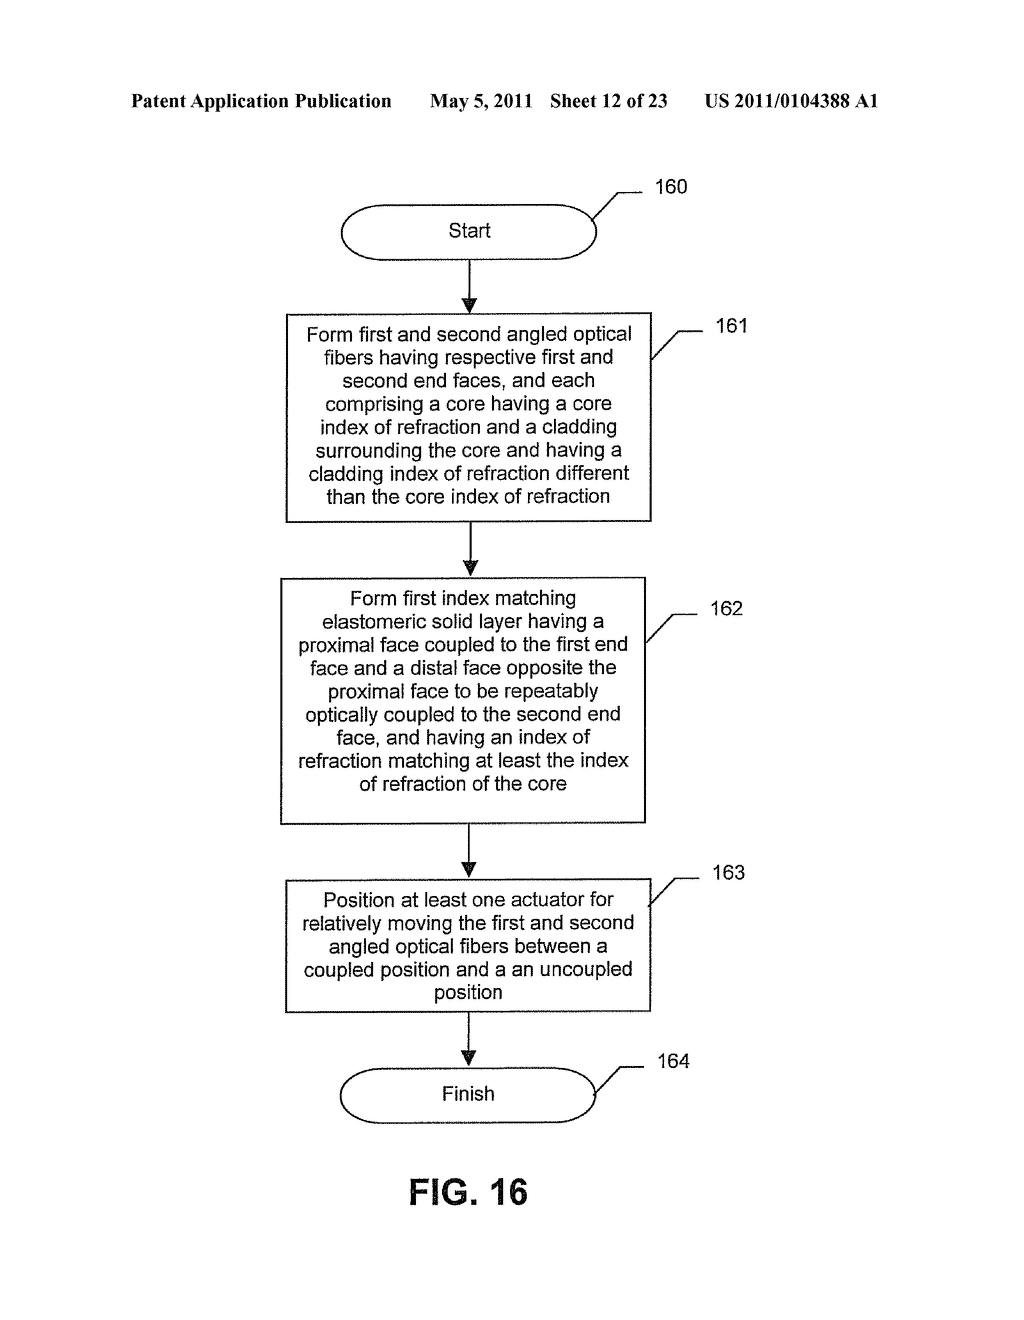 METHOD FOR MAKING AN OPTICAL DEVICE INCLUDING A CURABLE INDEX MATCHING ELASTOMERIC SOLID LAYER - diagram, schematic, and image 13